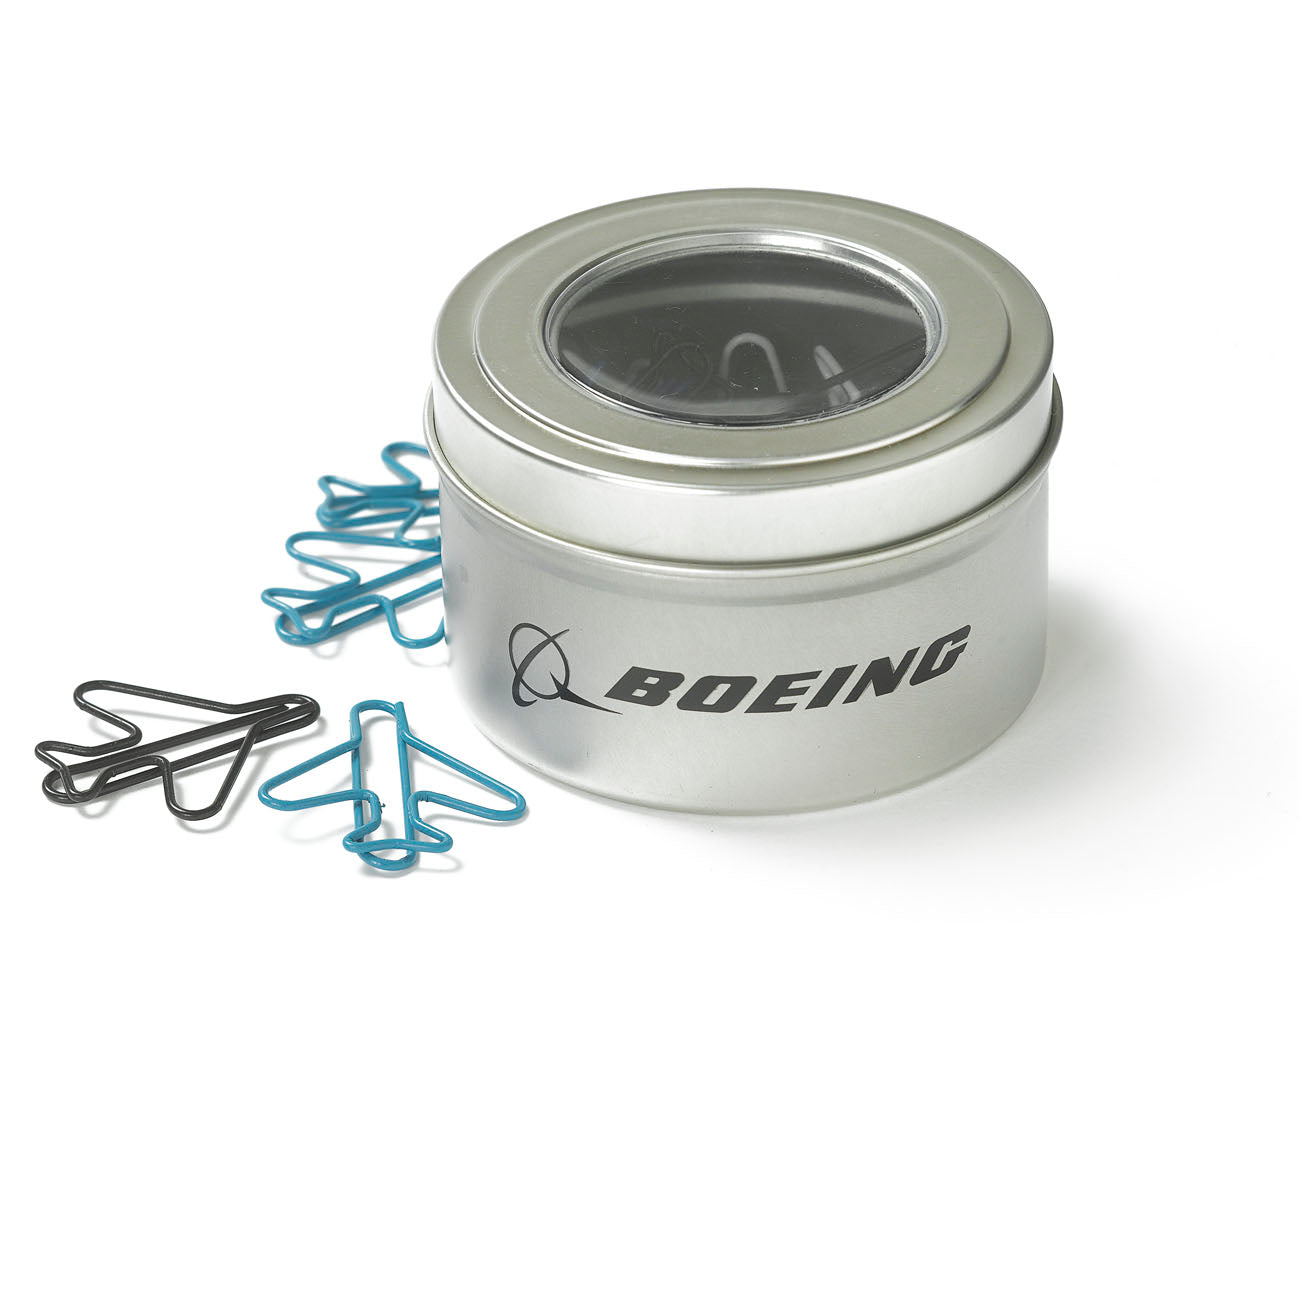 Boeing Airplane Shaped Paperclips (6403268422)